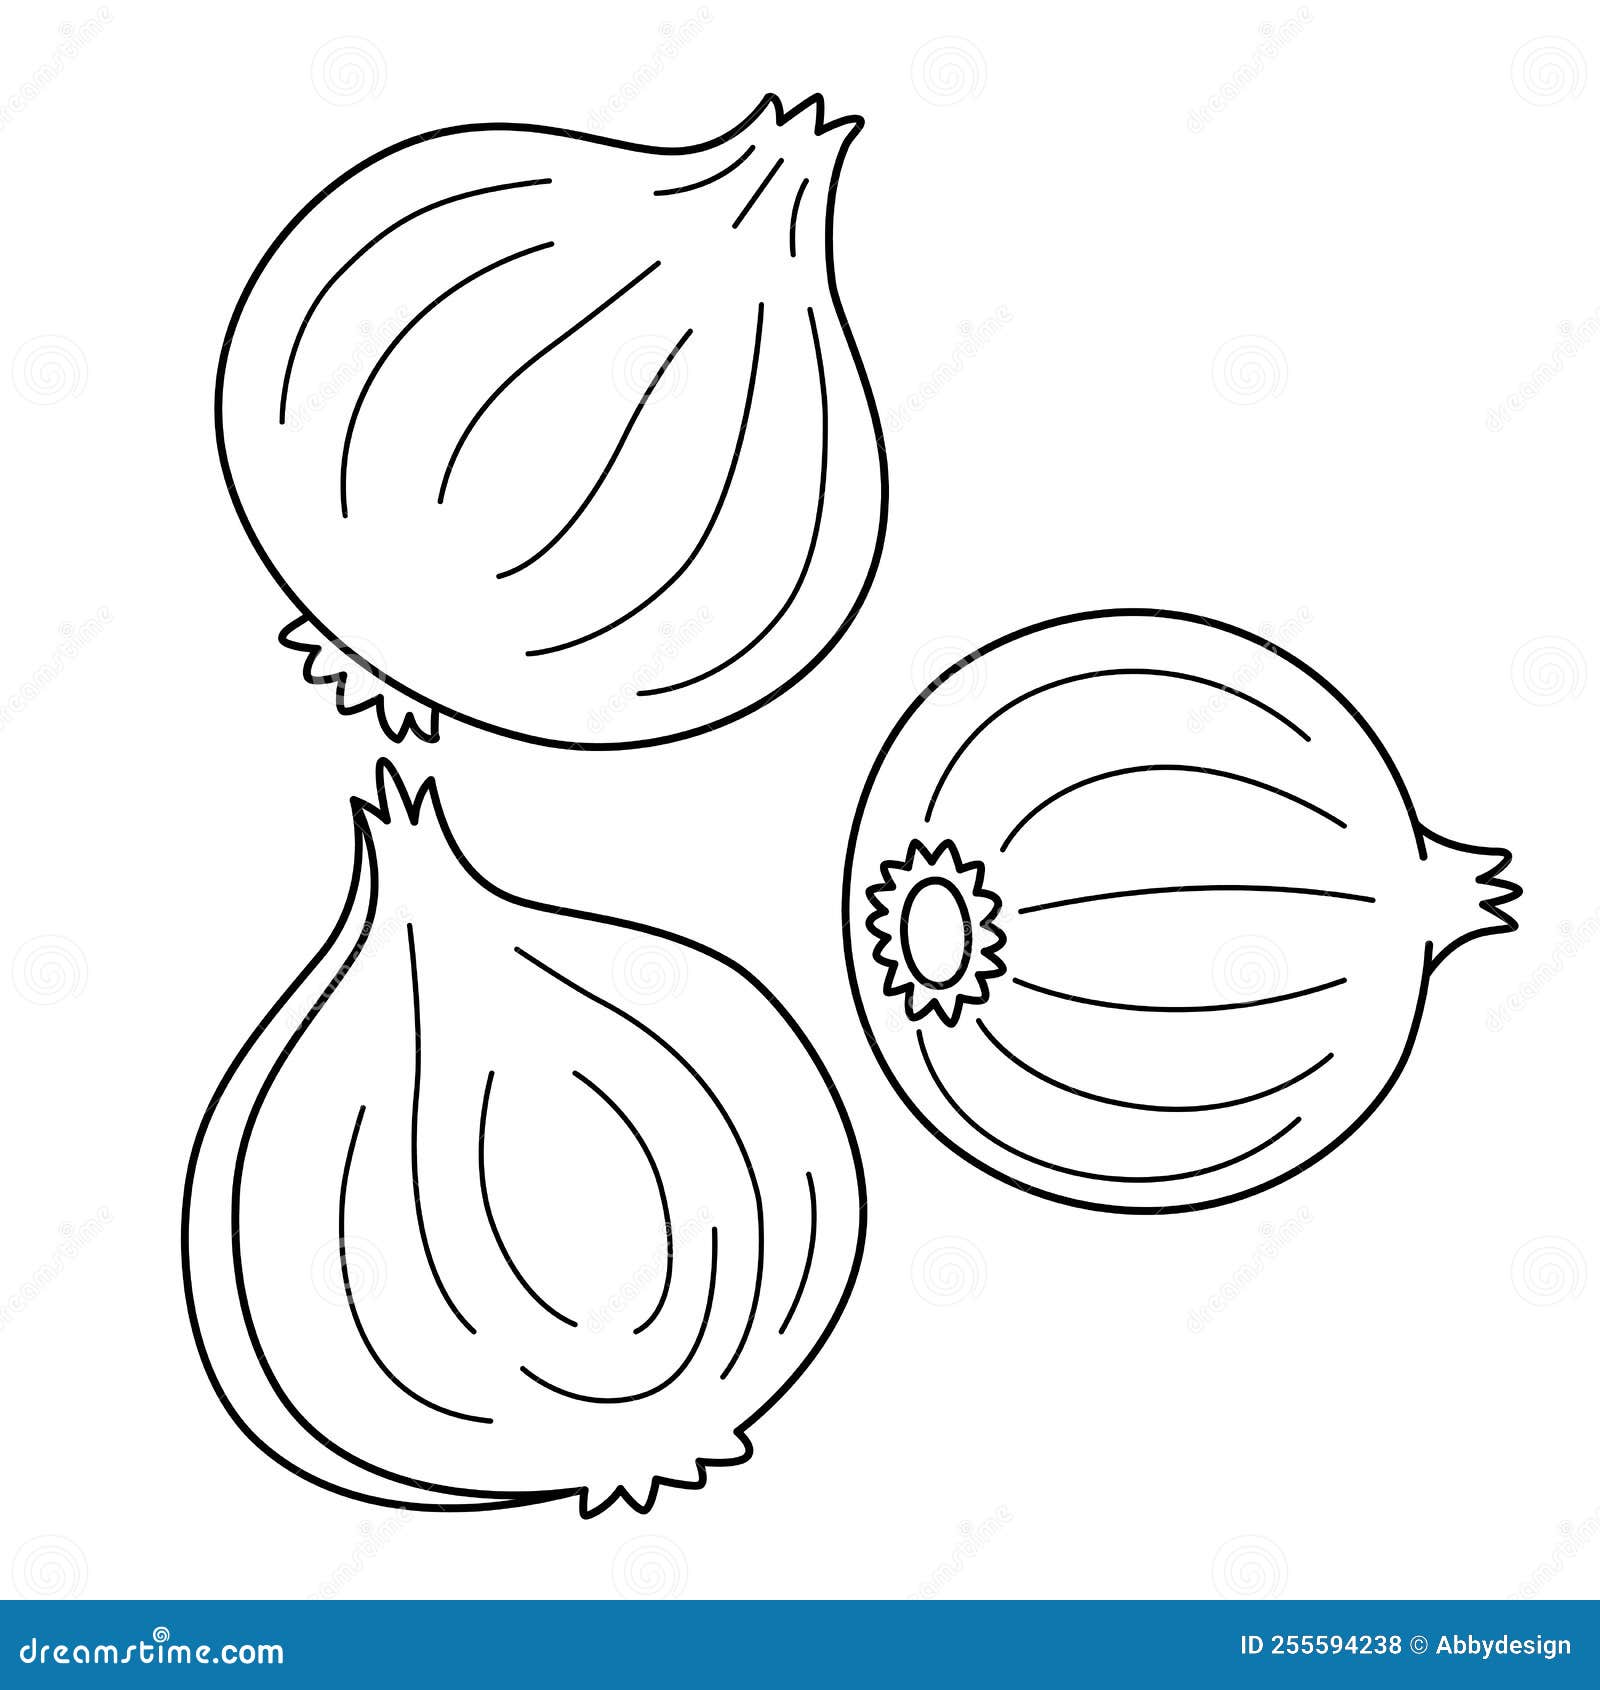 How to Draw Garlic - Really Easy Drawing Tutorial